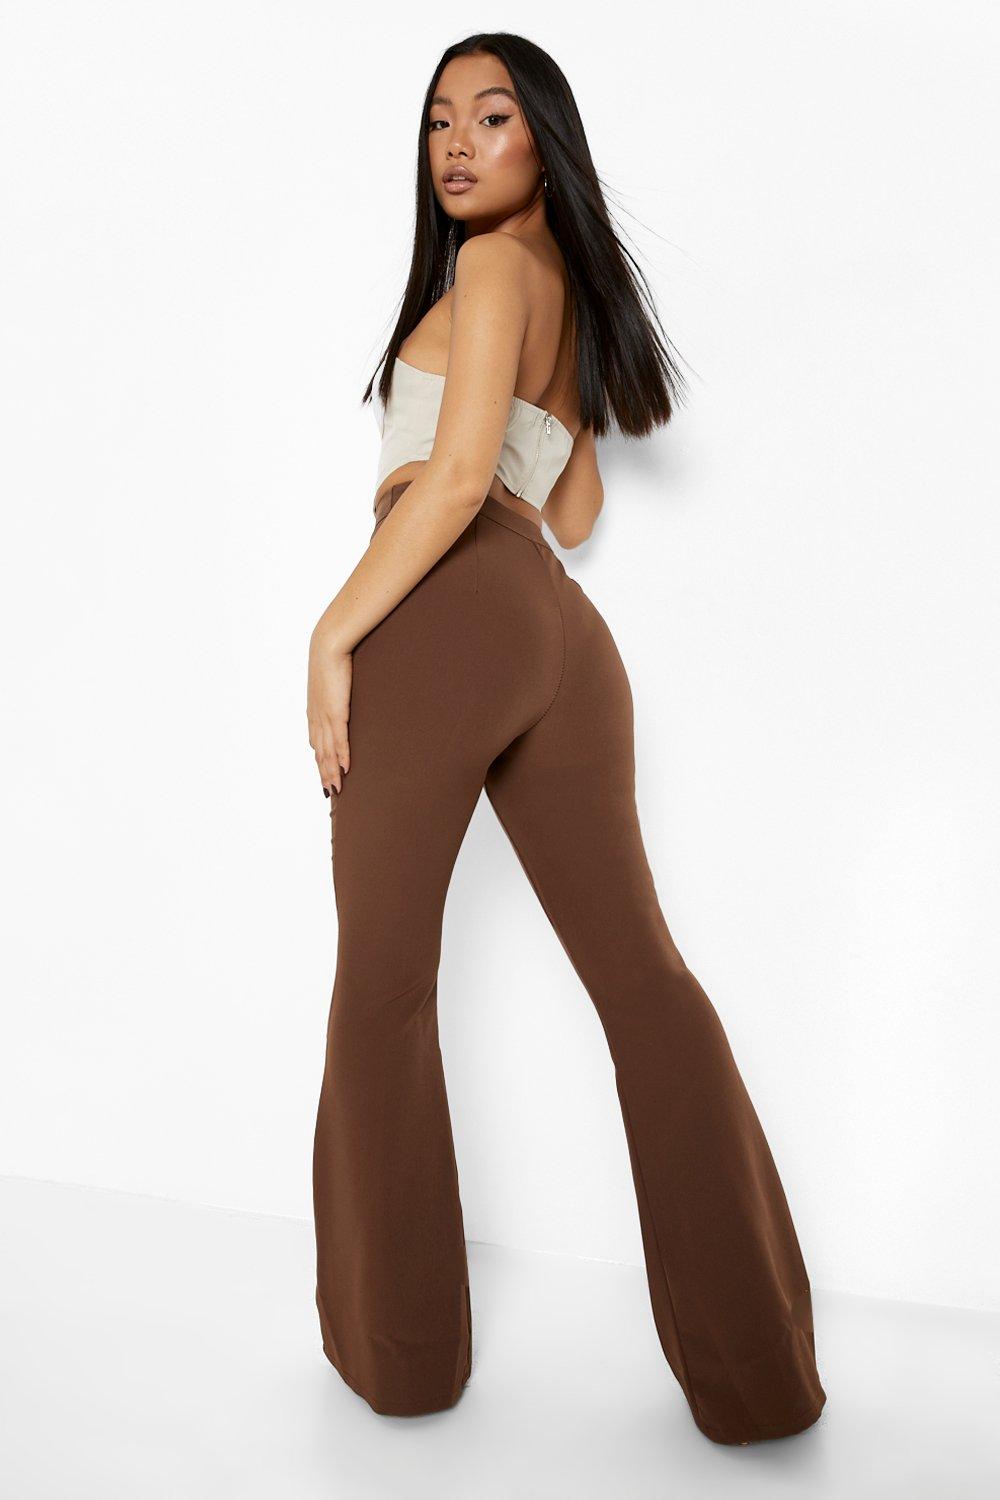 Ripen Contour upright flare dress pants outfit Since Reductor Bedroom